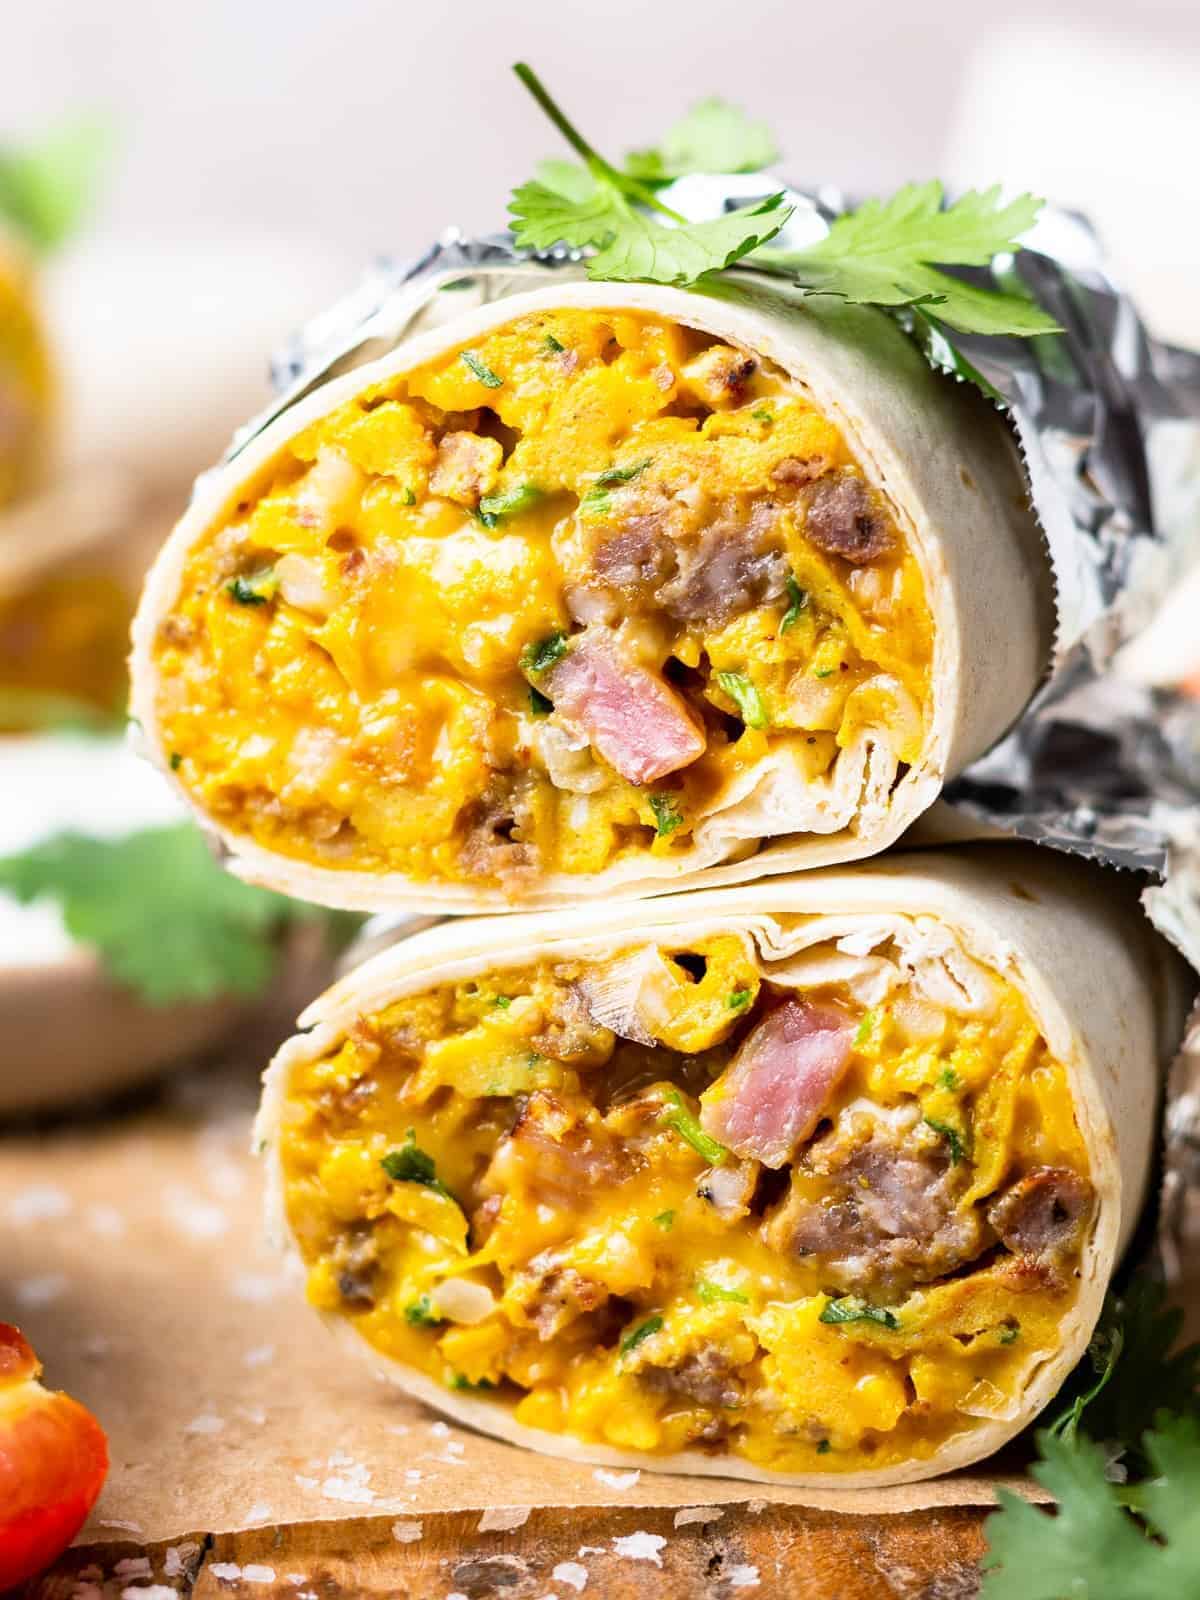 head-on view of a halved make ahead breakfast burrito stacked to show the filling.